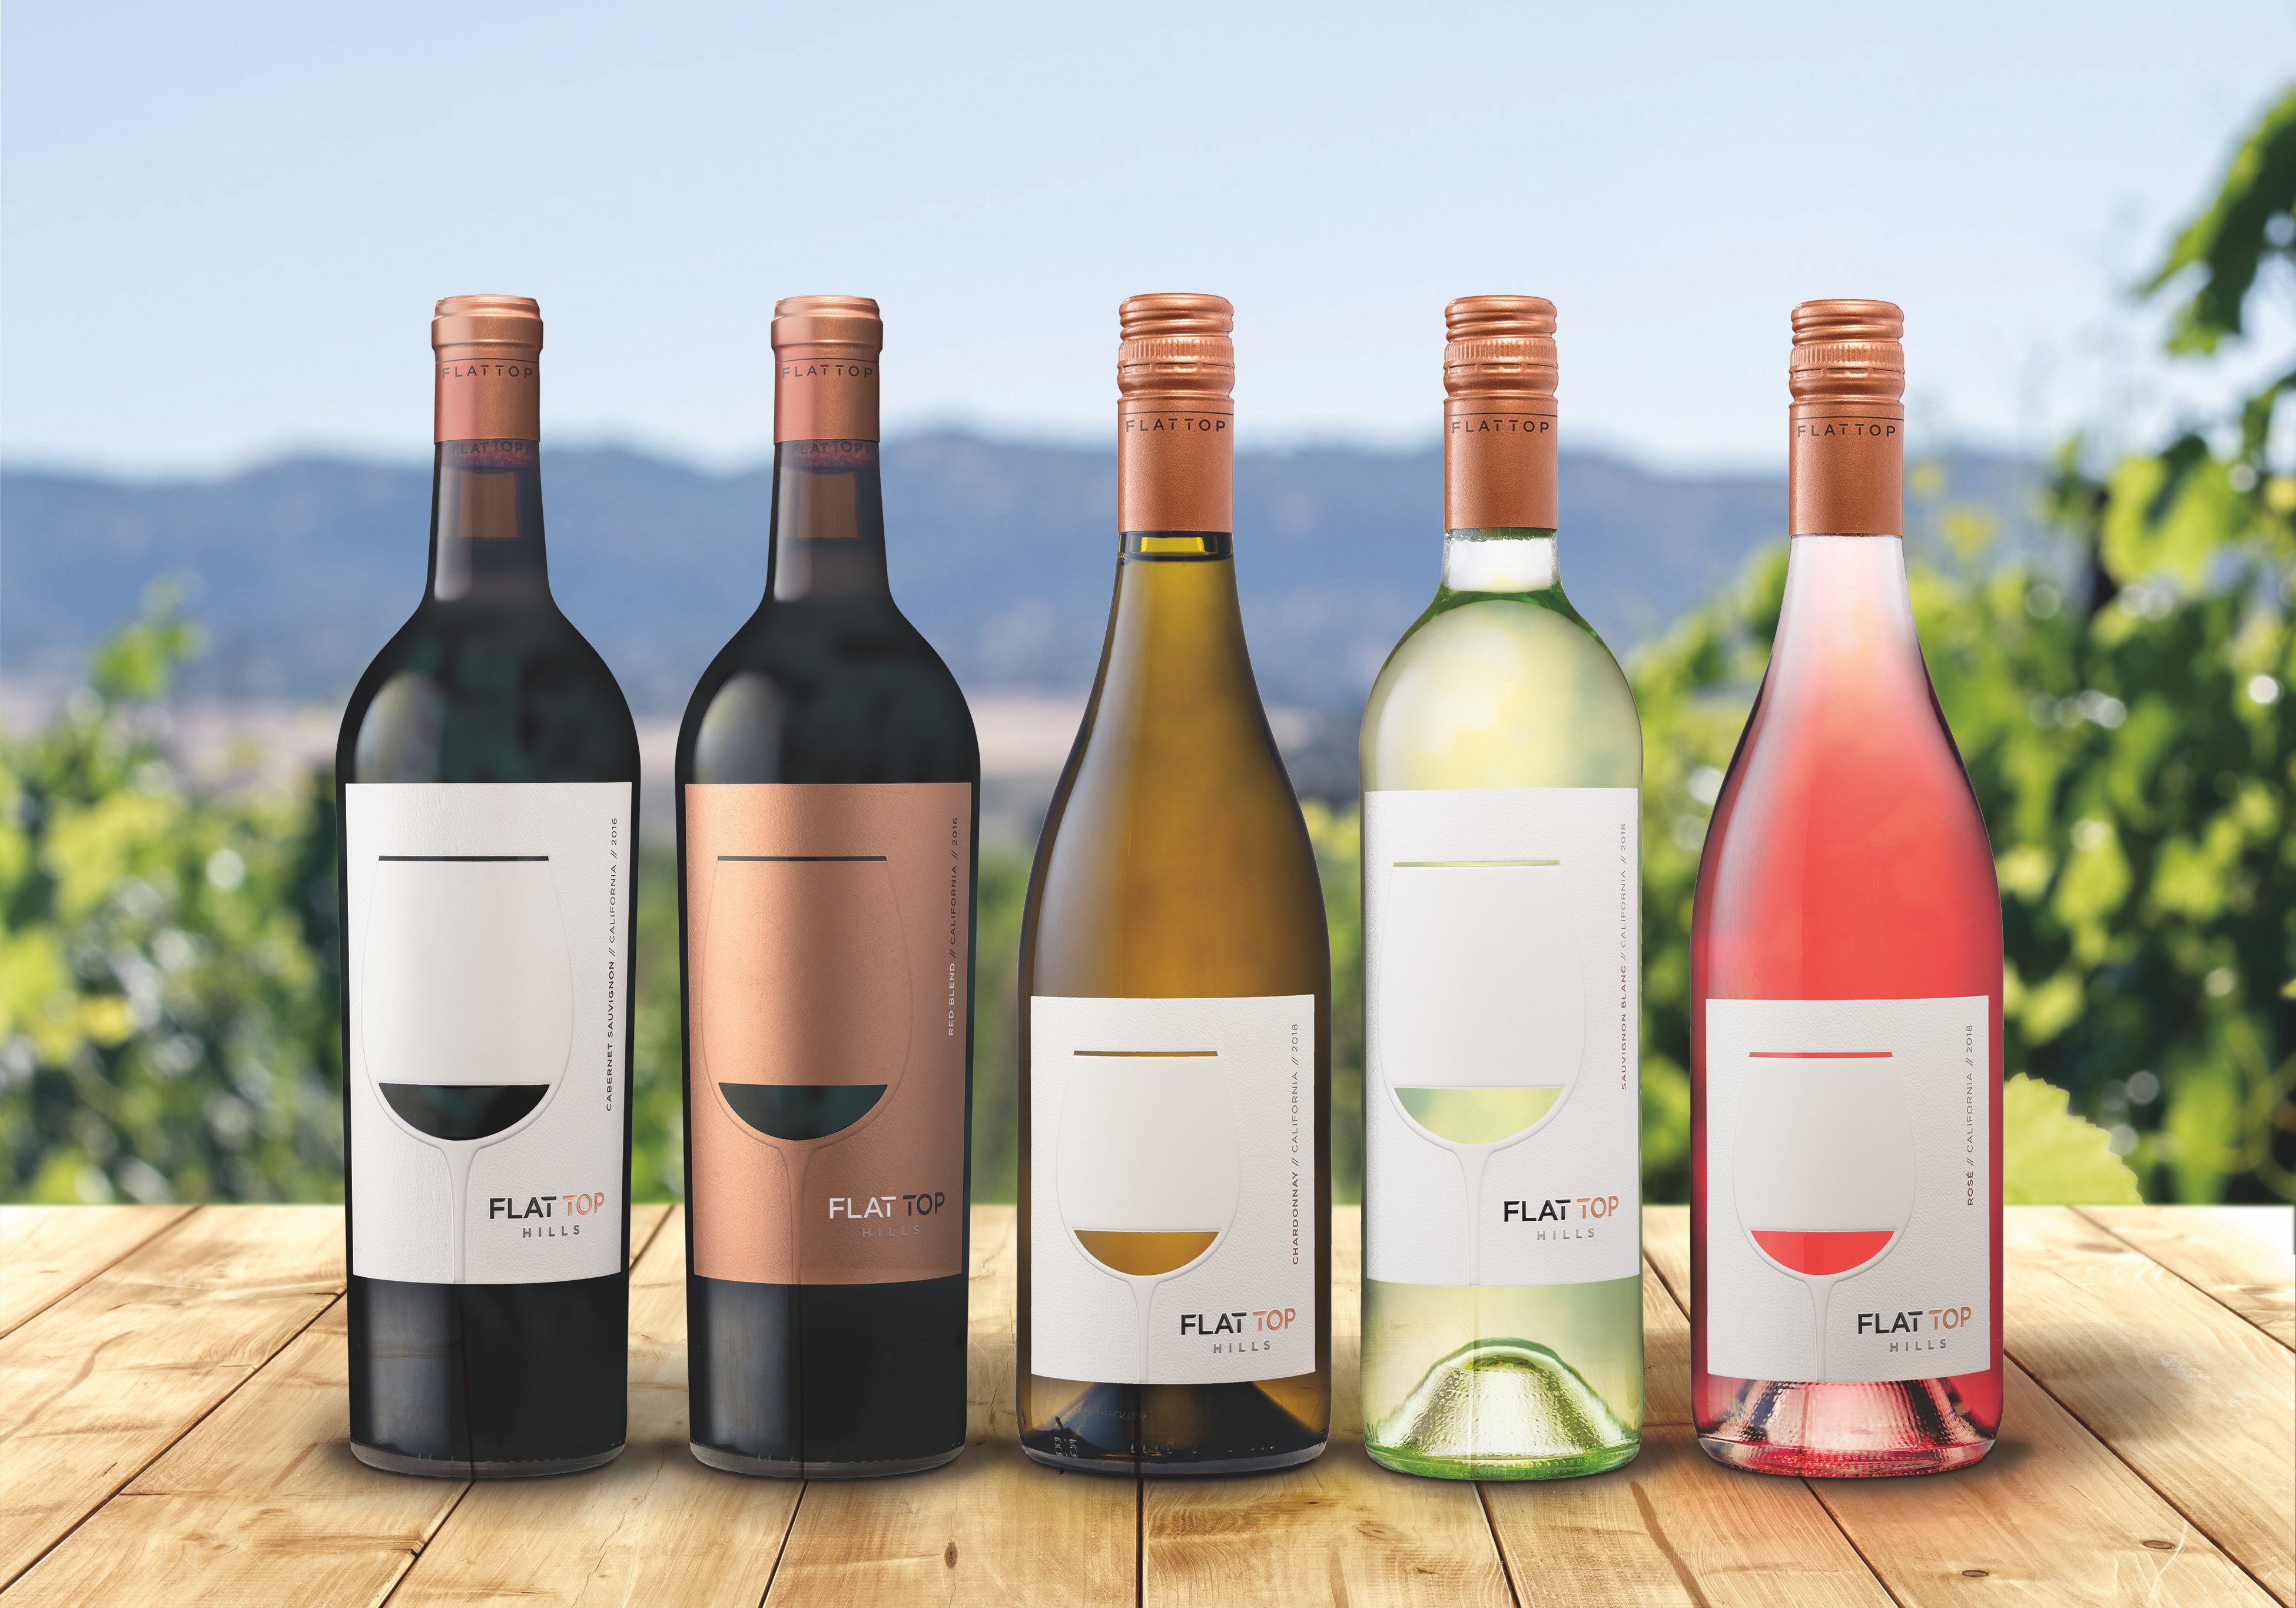 With bold flavors, a distinctive fruit-forward style, and sleek design, Flat Top Hills wines are available nationwide.